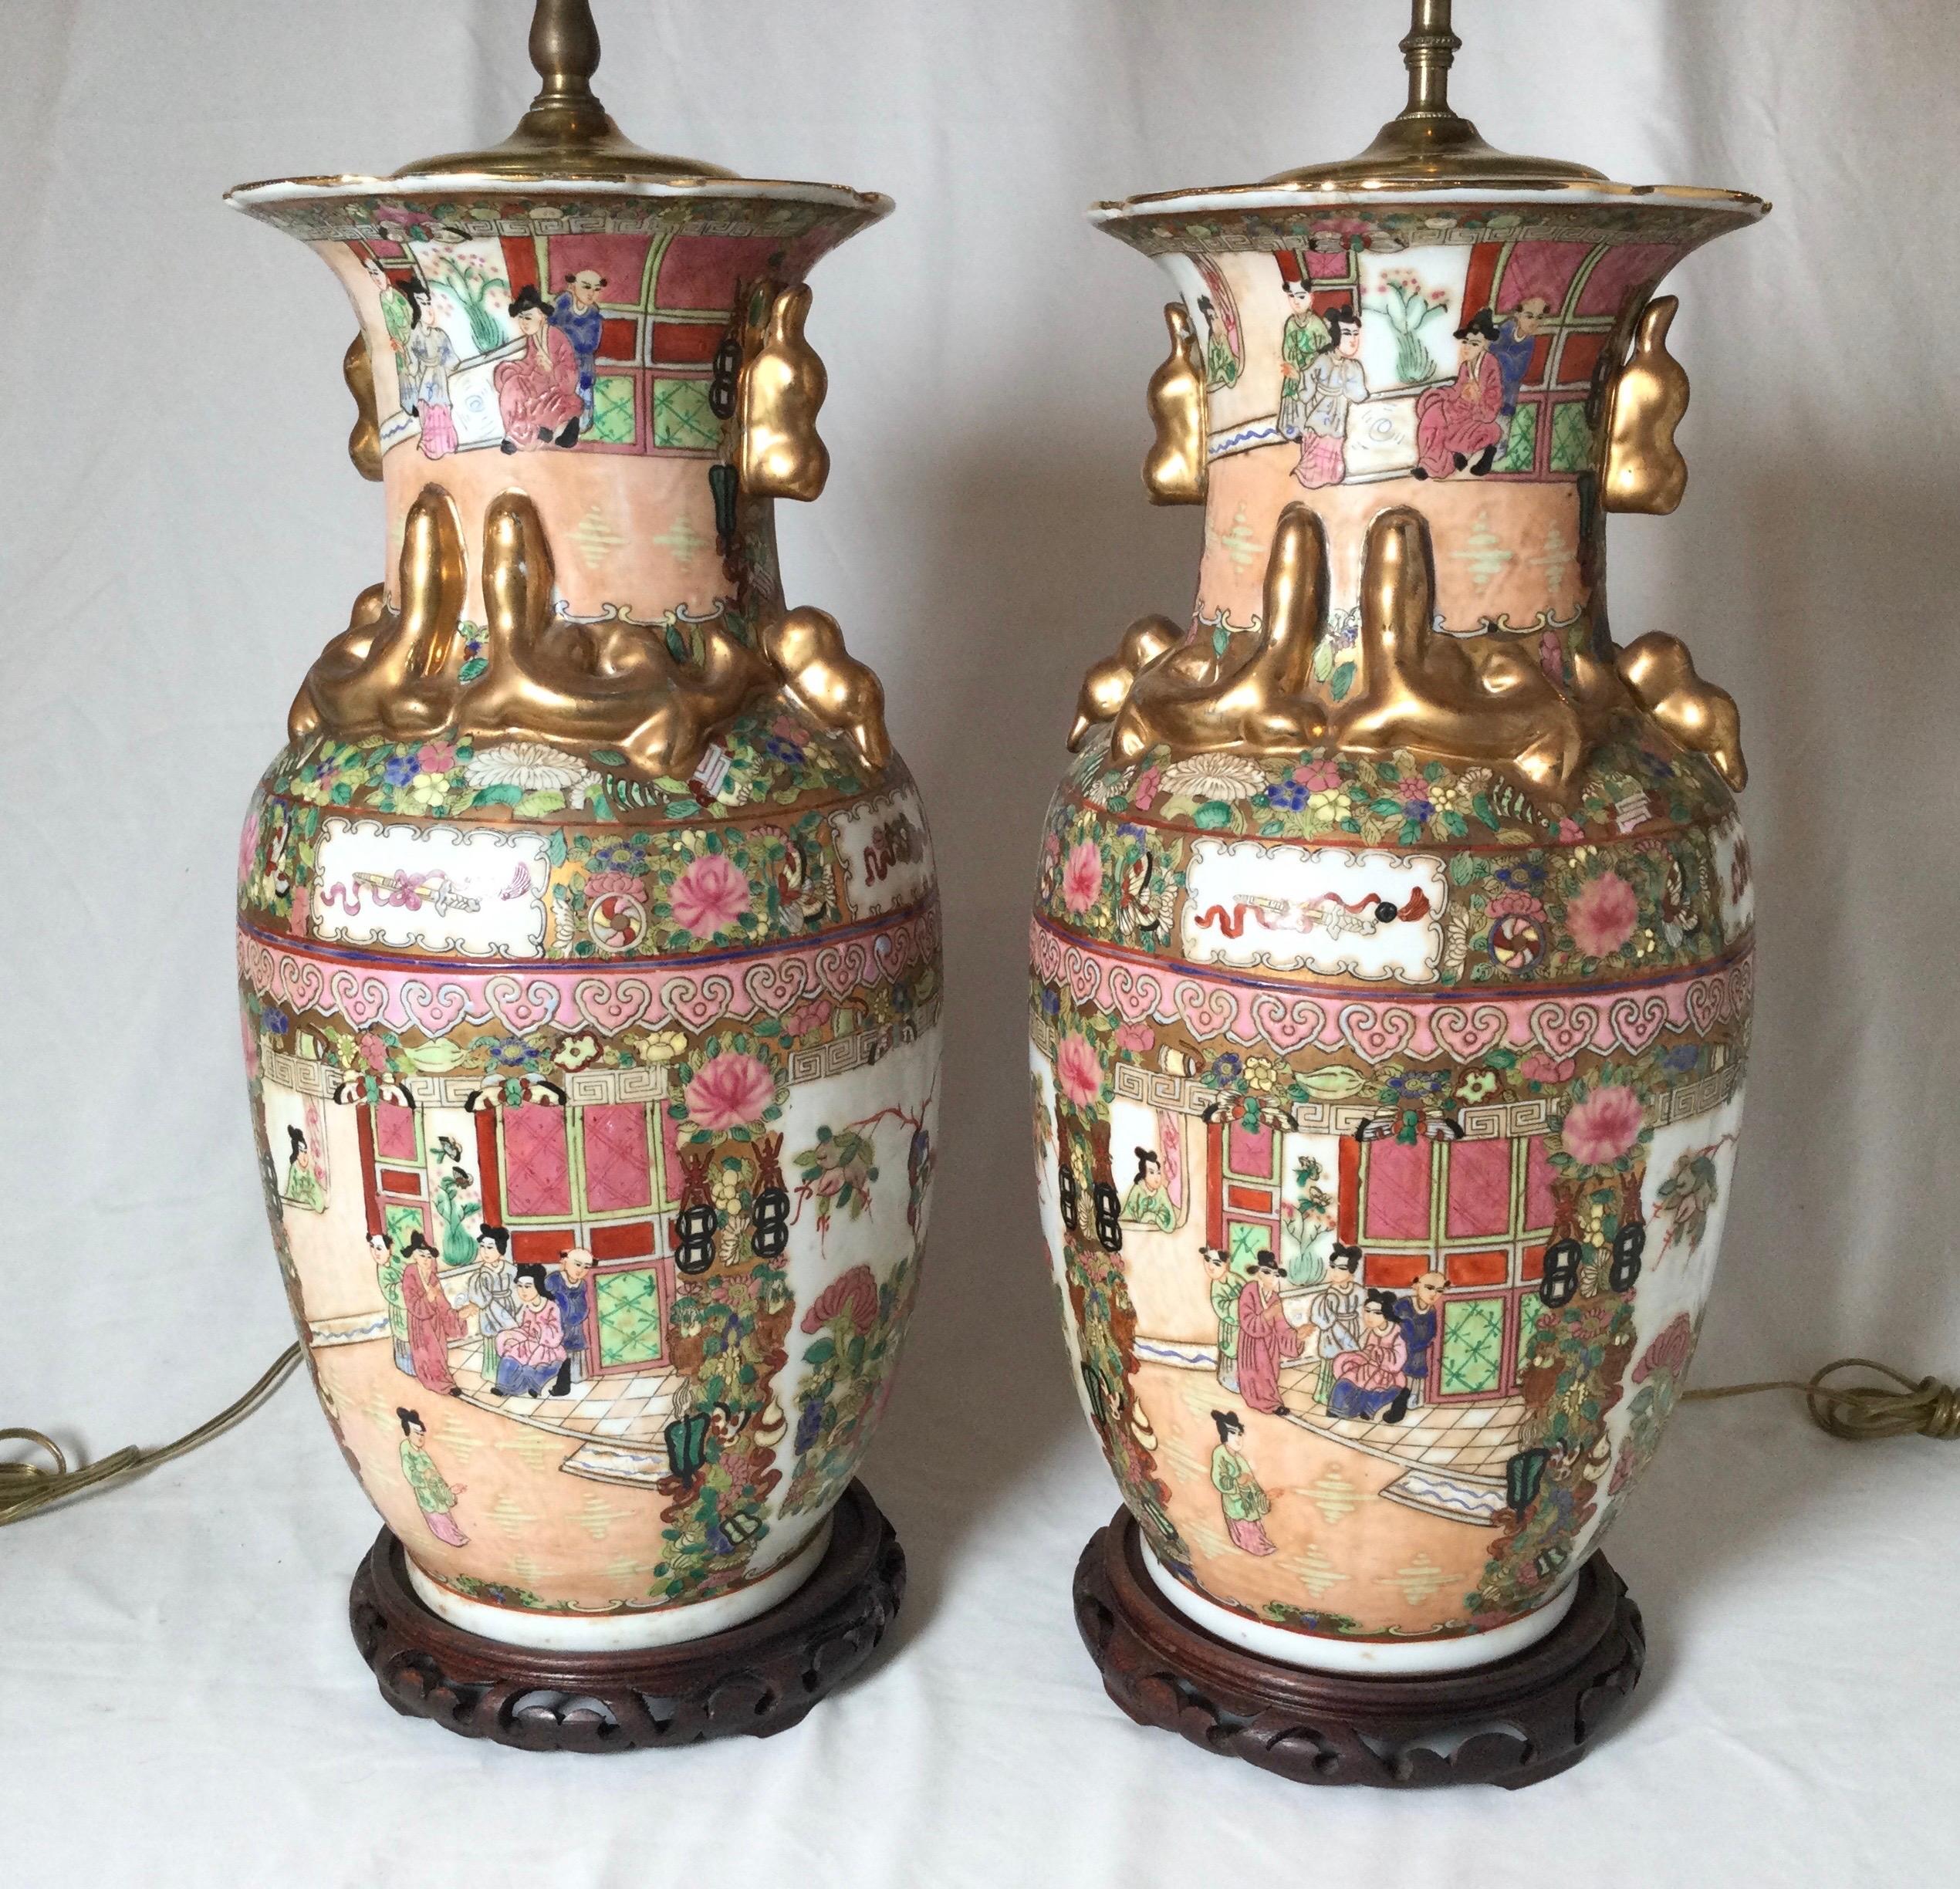 A pair of mid 20th century Chinese porcelain lamps, with wood Asian style bases. The hand painted porcelain in a Chinese Export Style with gilt dragon handles. 36 inches with a shade, 25.5 inches to the top of the socket, 9 in diameter.